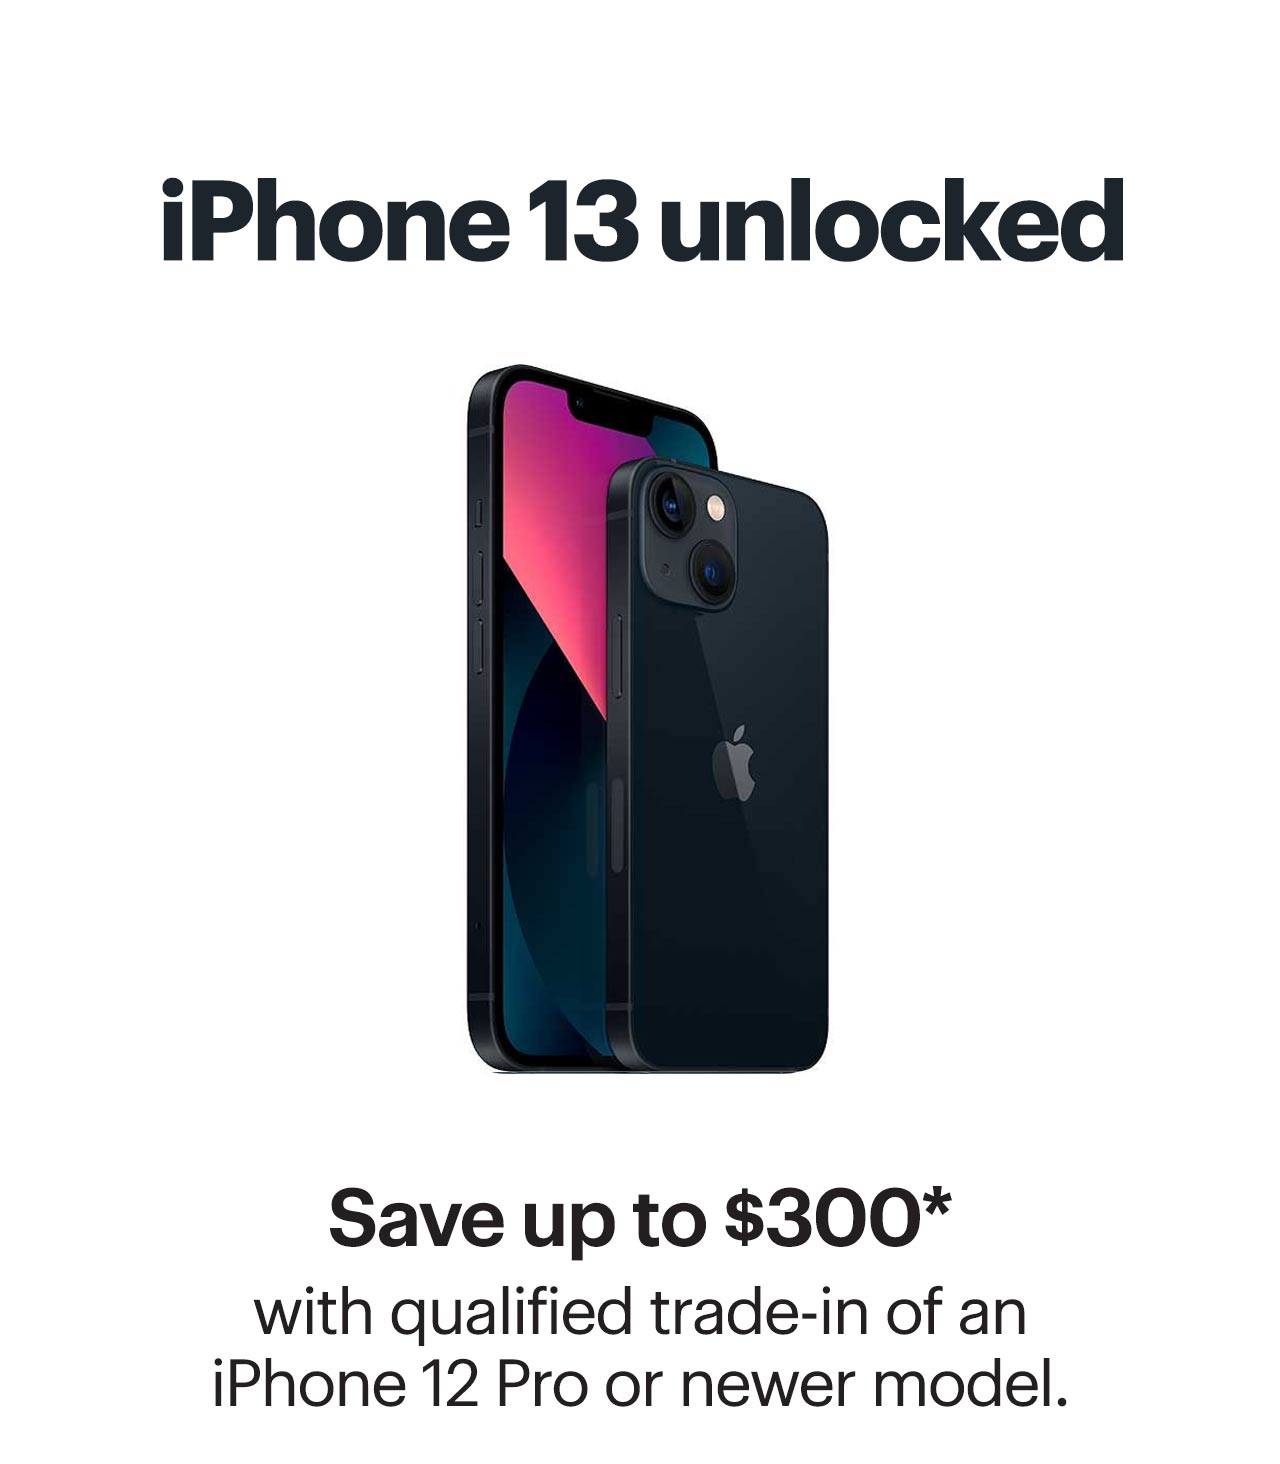 iPhone 13 unlocked. Save up to $300 with qualified trade-in of an iPhone 12 Pro or newer model. Reference disclaimer.